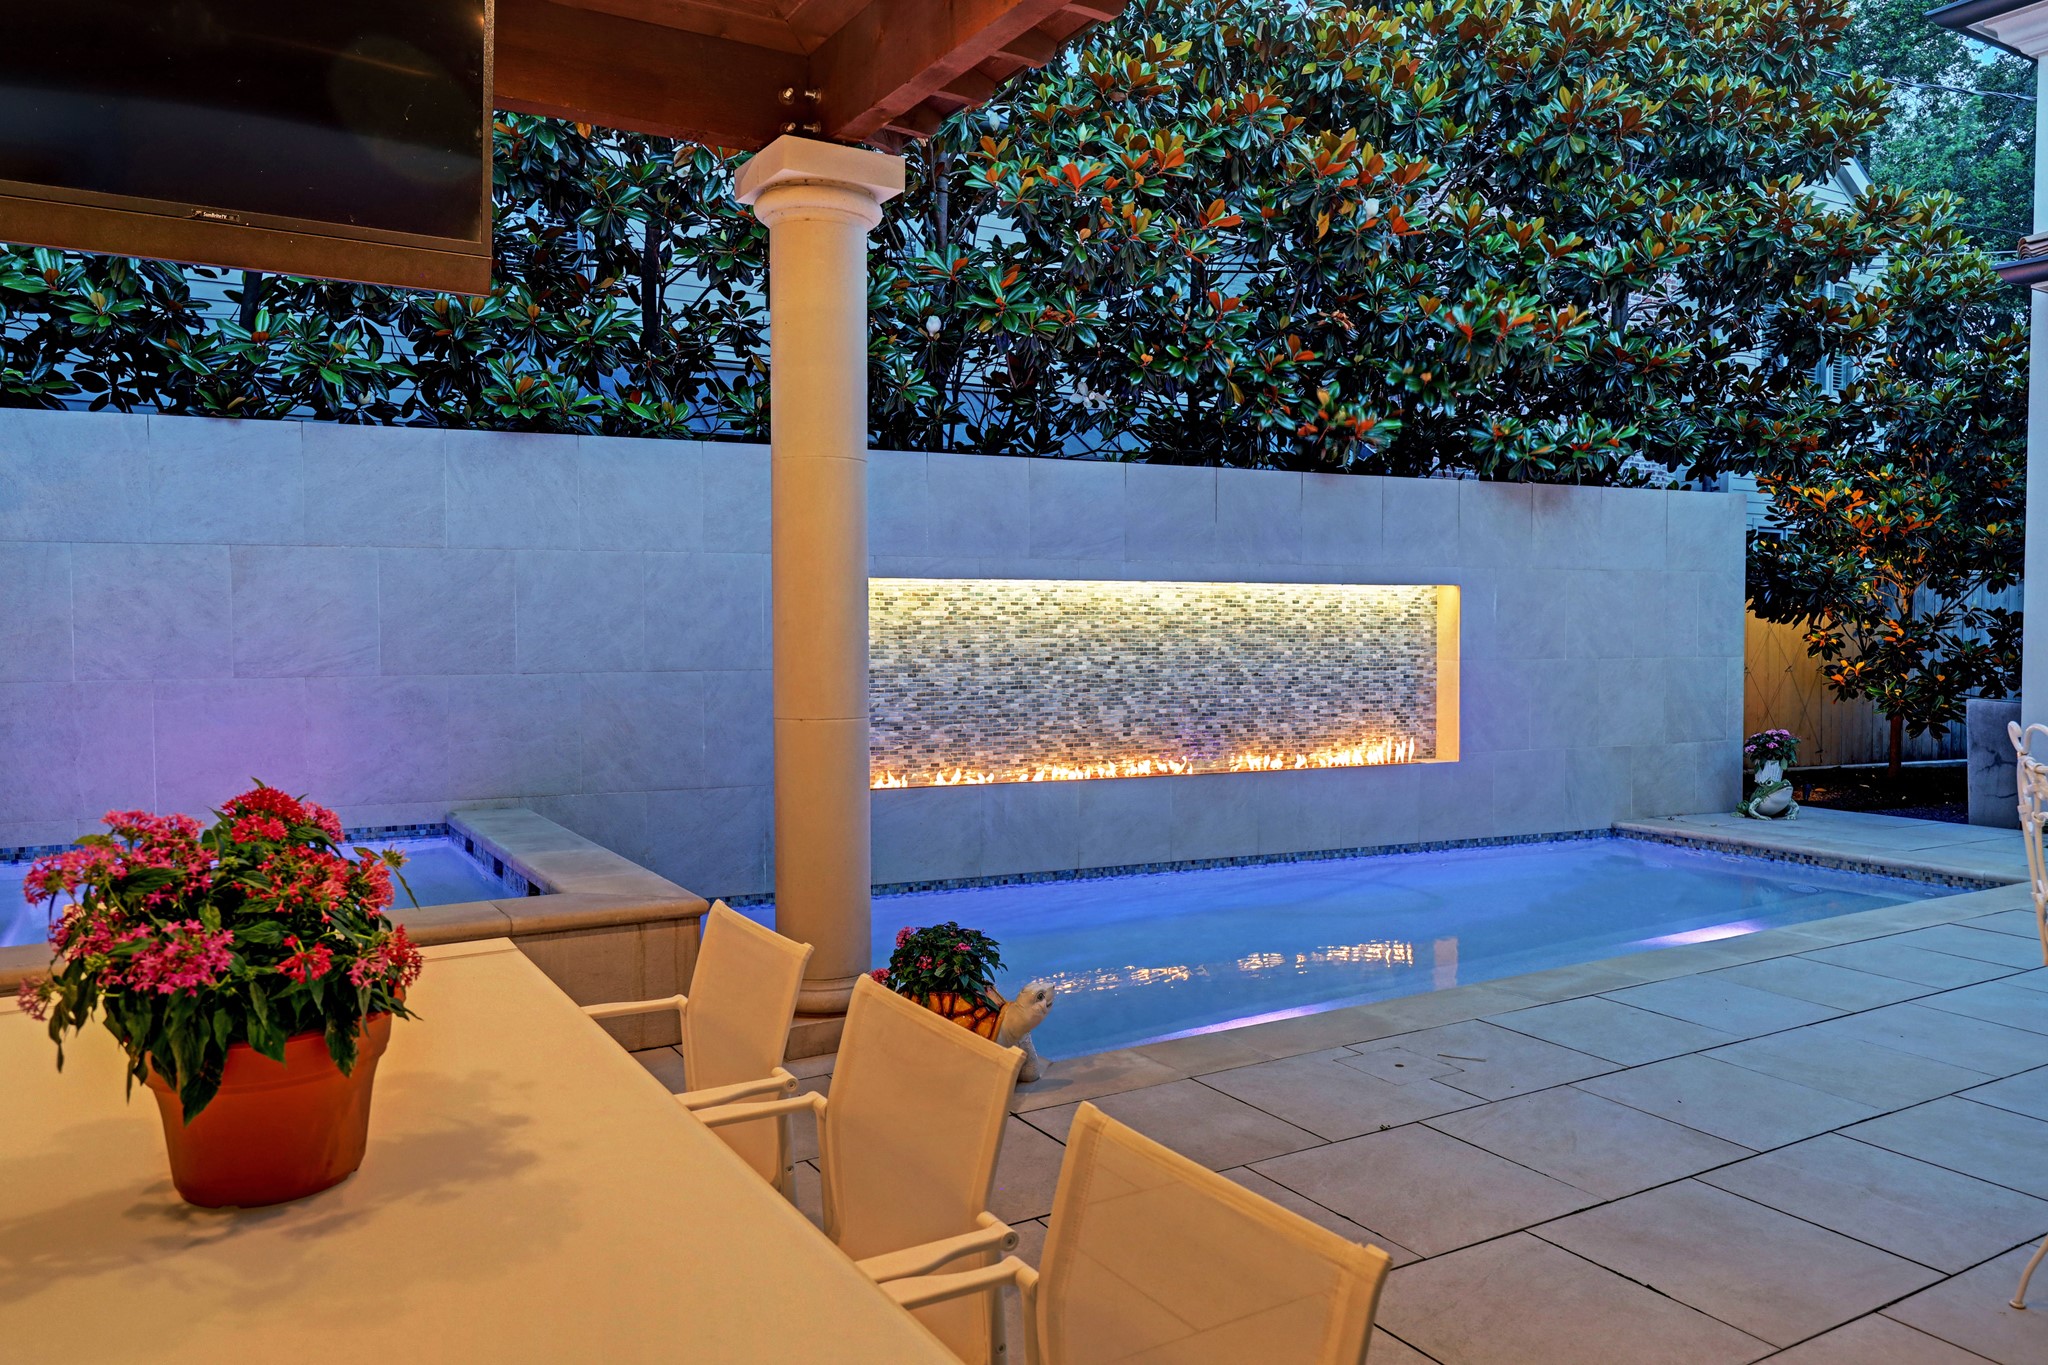 [Spa and Pool] Note illuminated decorative tile fire wall above the pool.